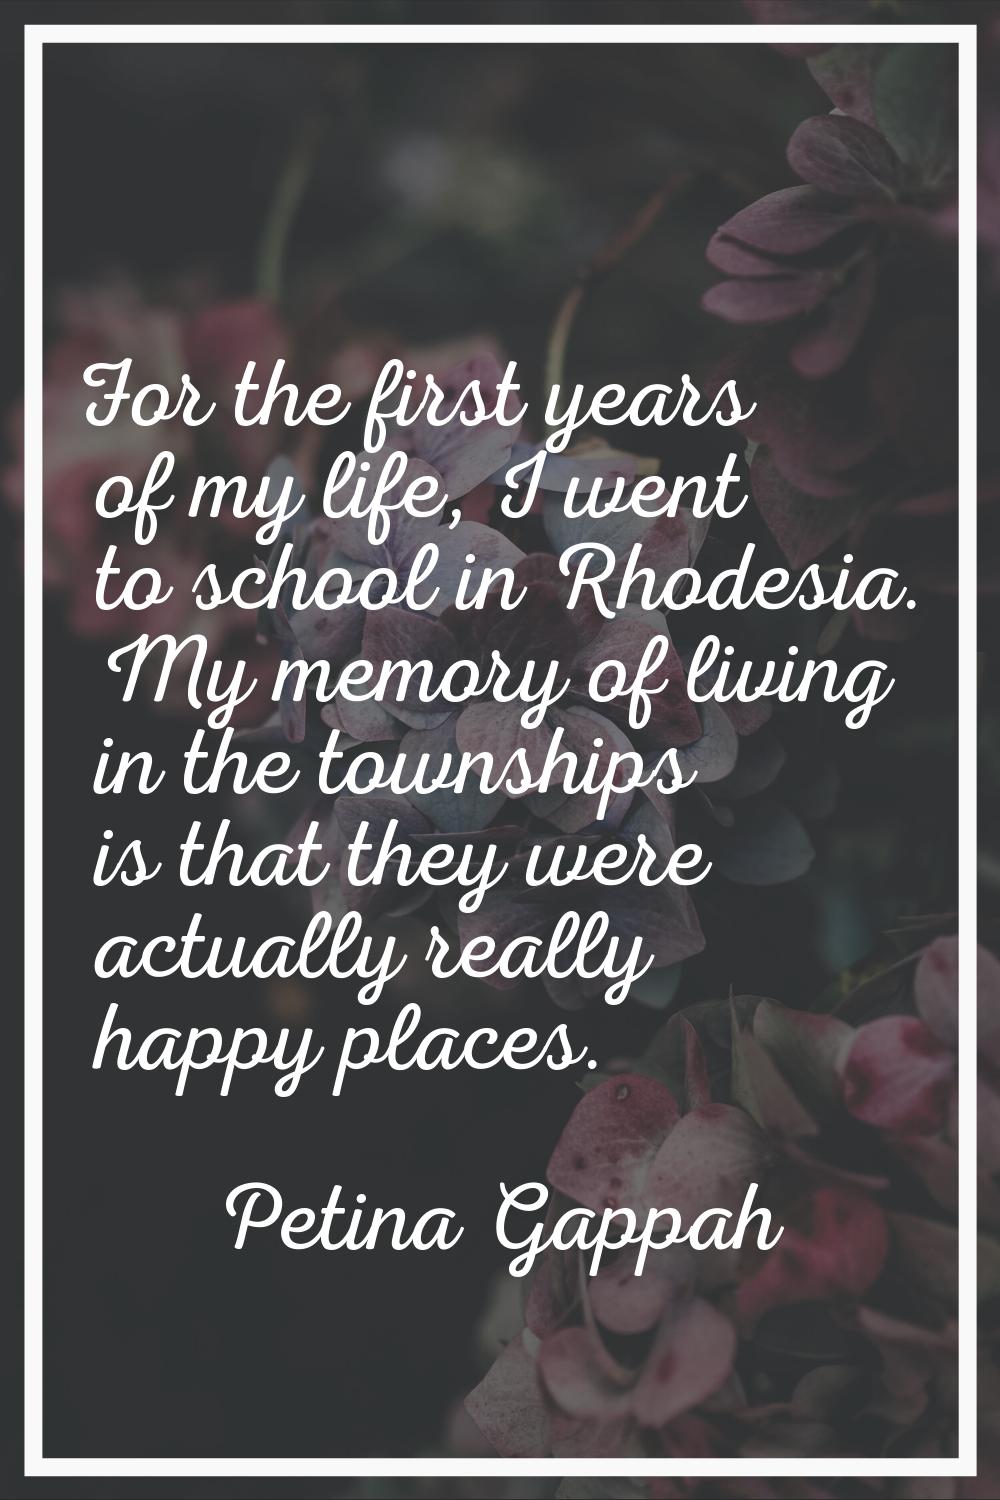 For the first years of my life, I went to school in Rhodesia. My memory of living in the townships 